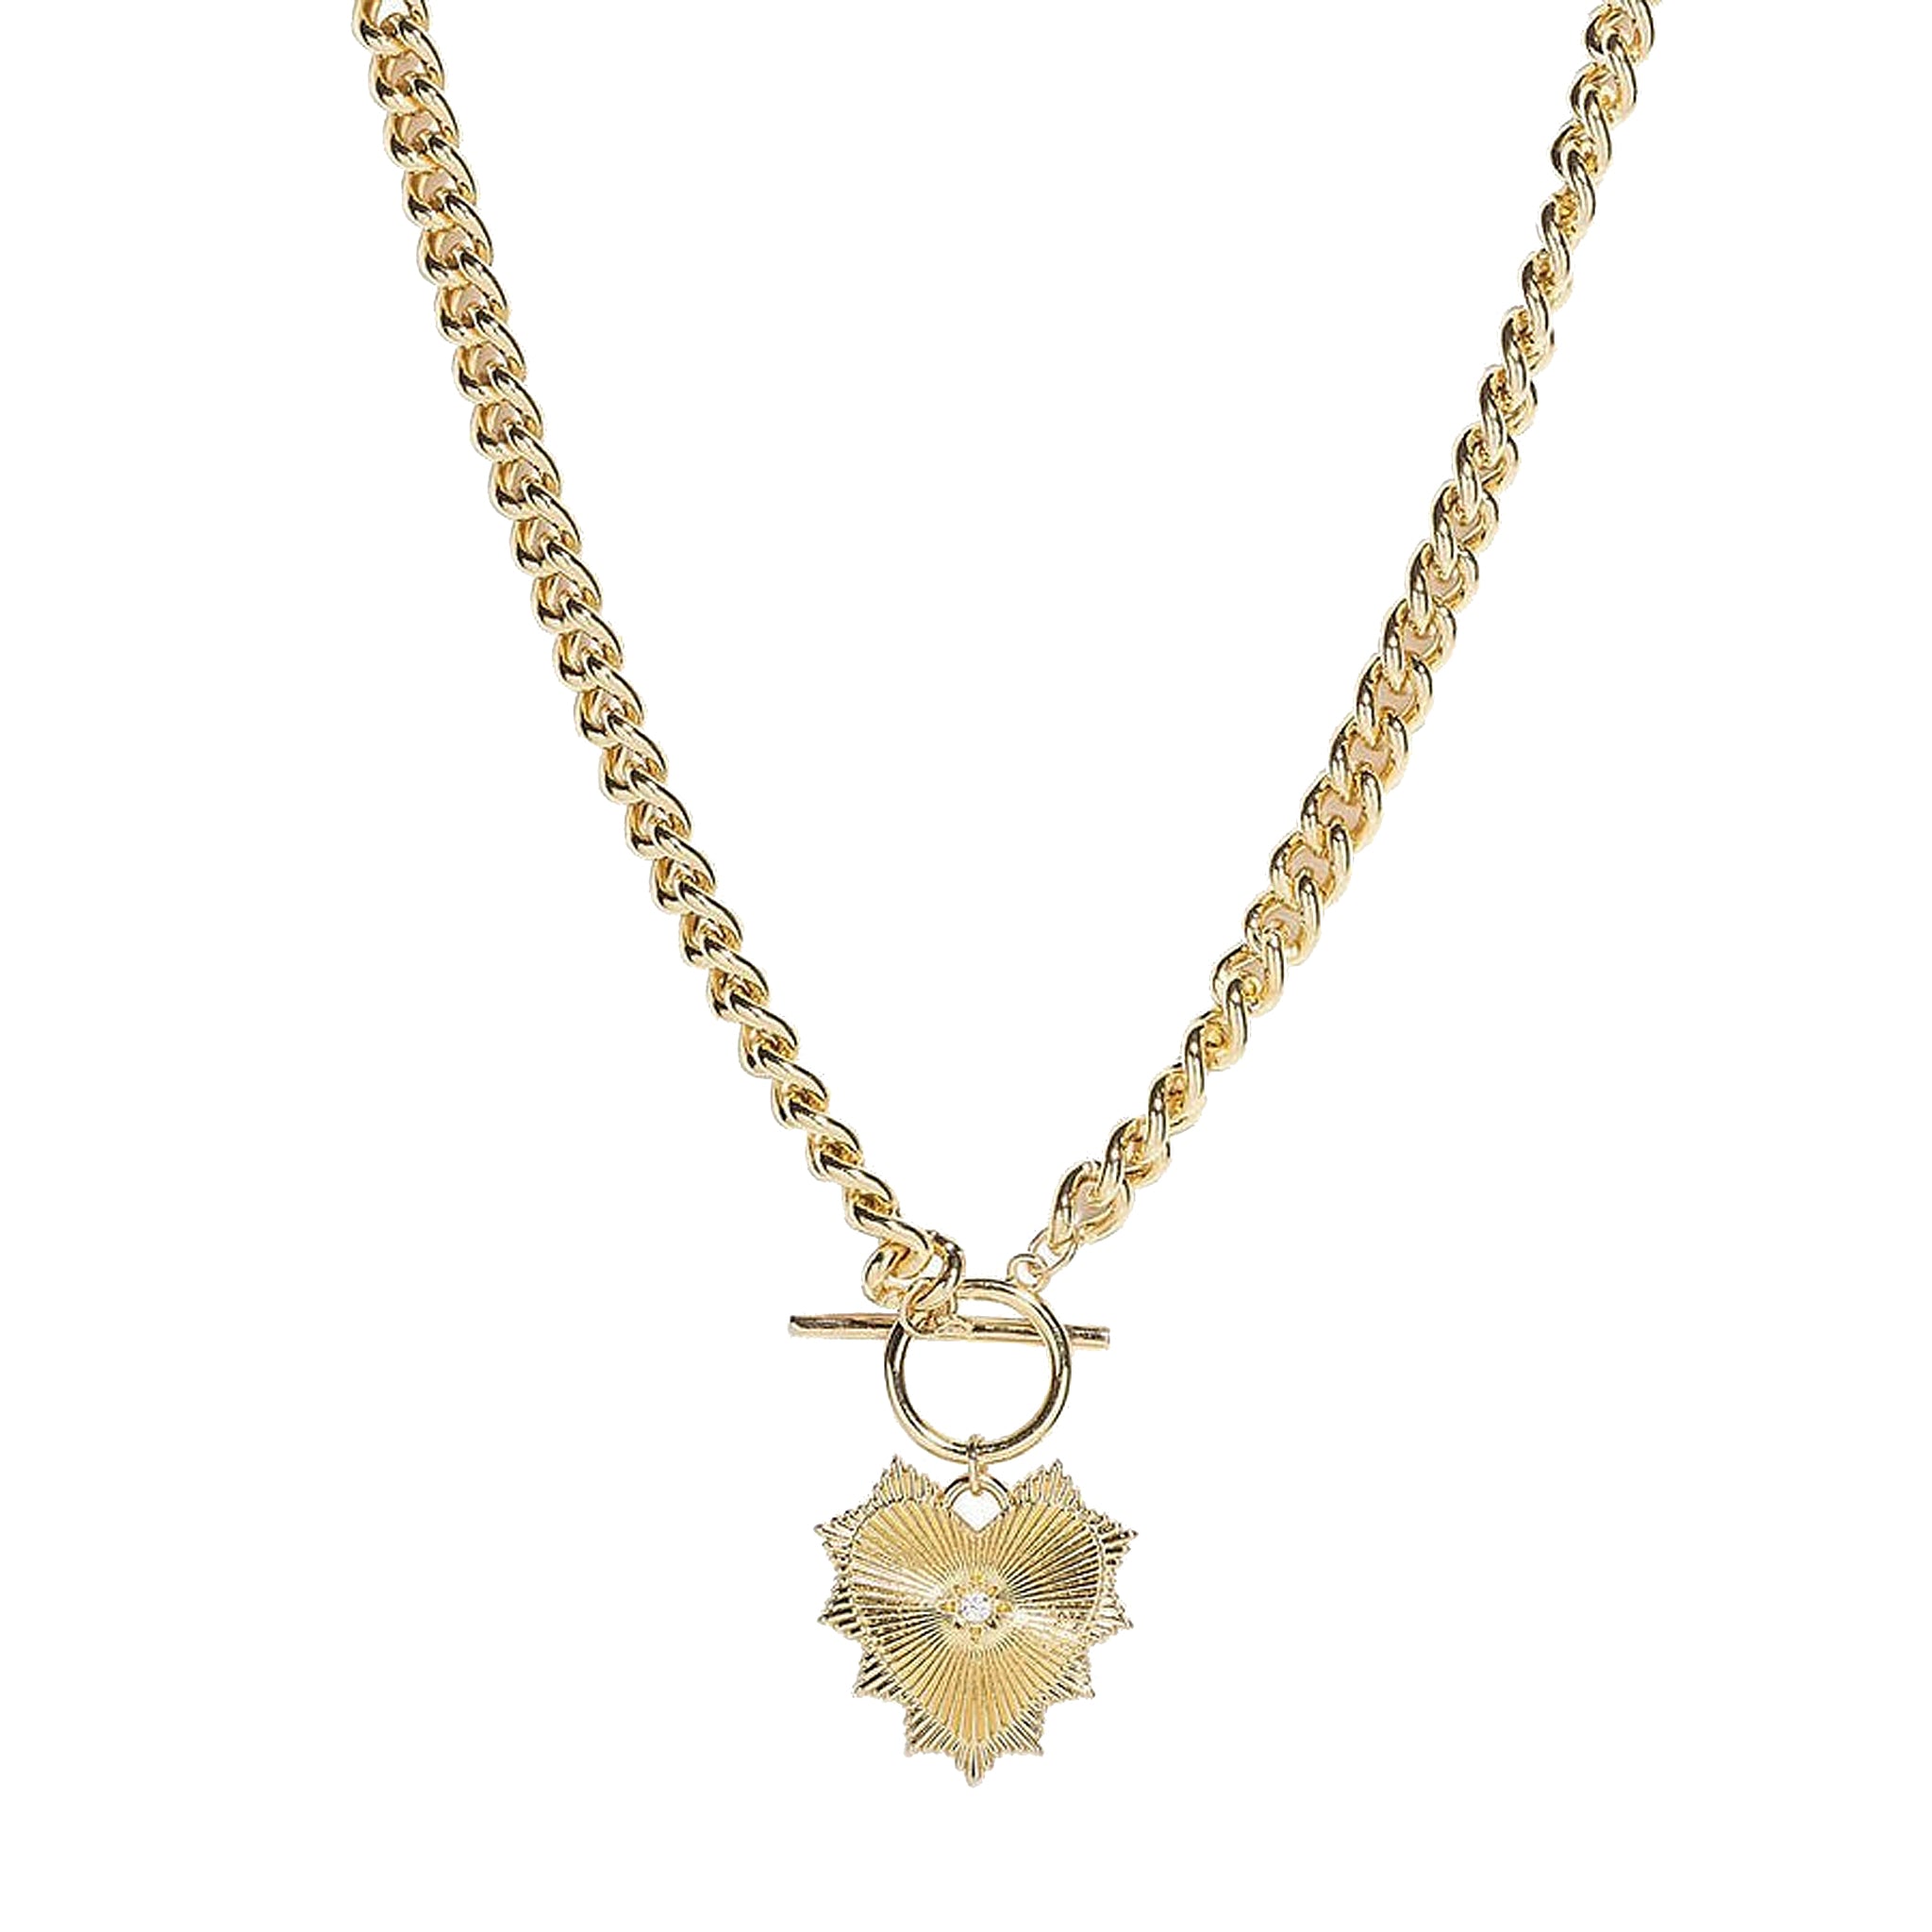 Five and Two Nova Heart Pendant Necklace in 14k Gold Plated